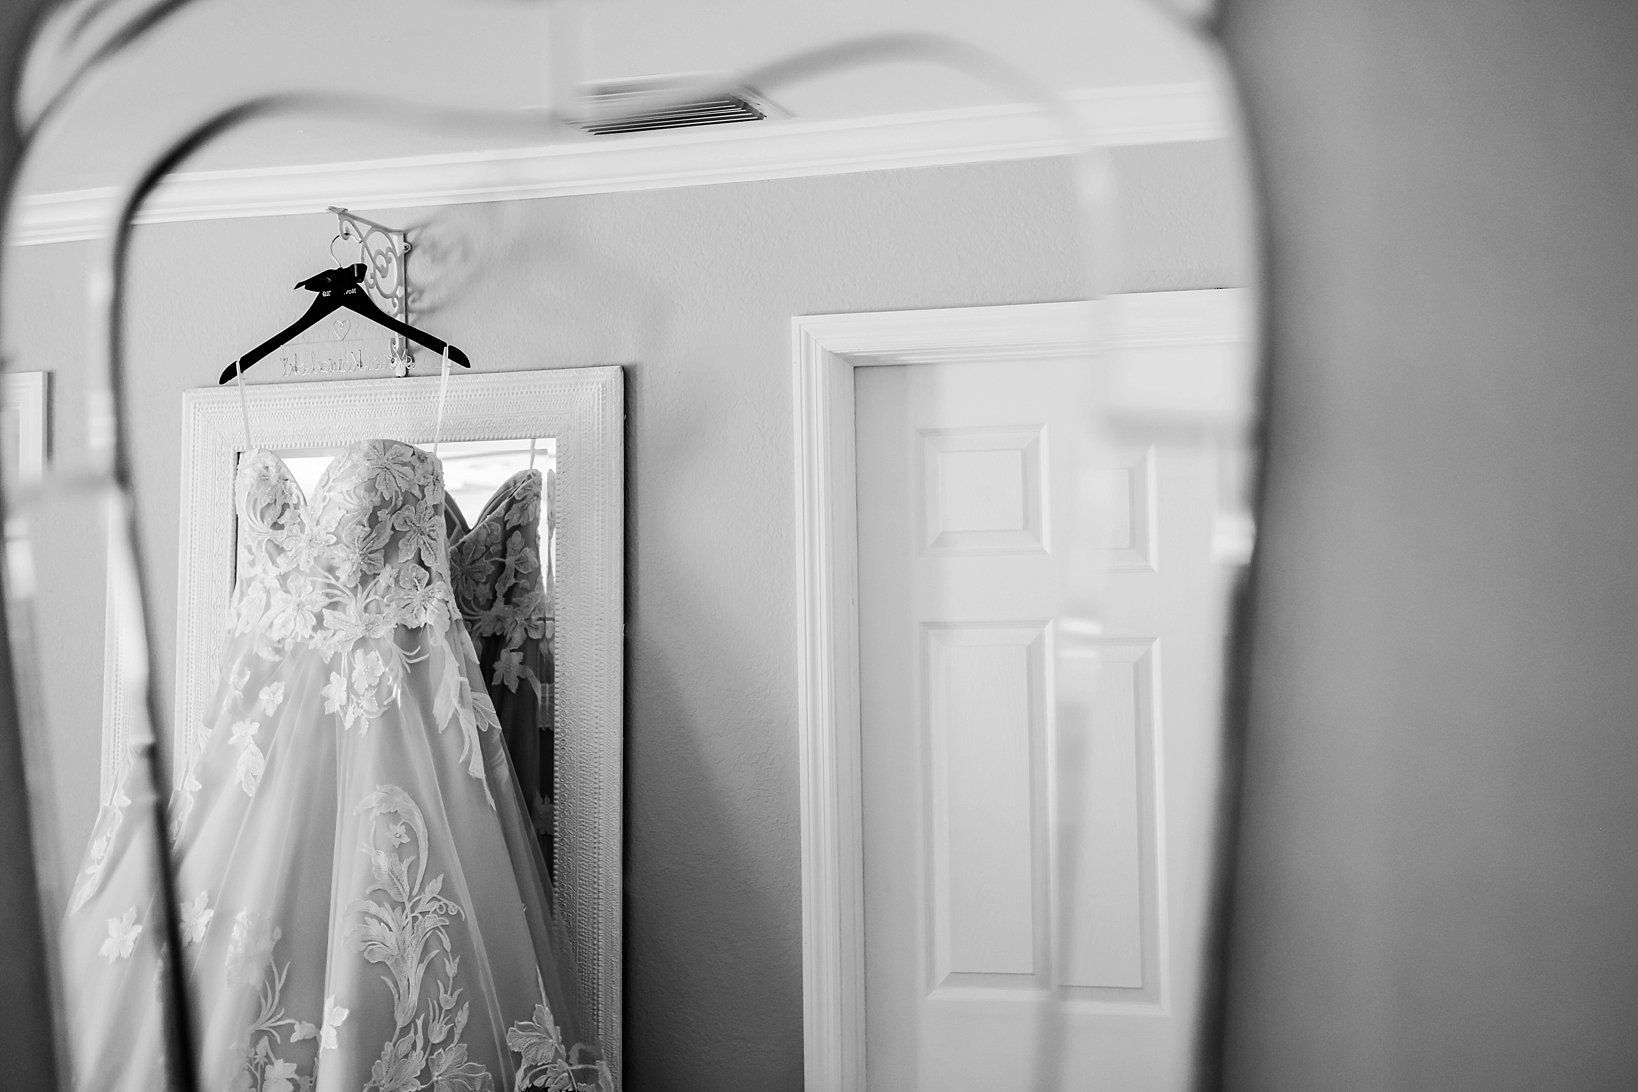 The wedding dress in the reflection of a mirror in timeless black and white photography